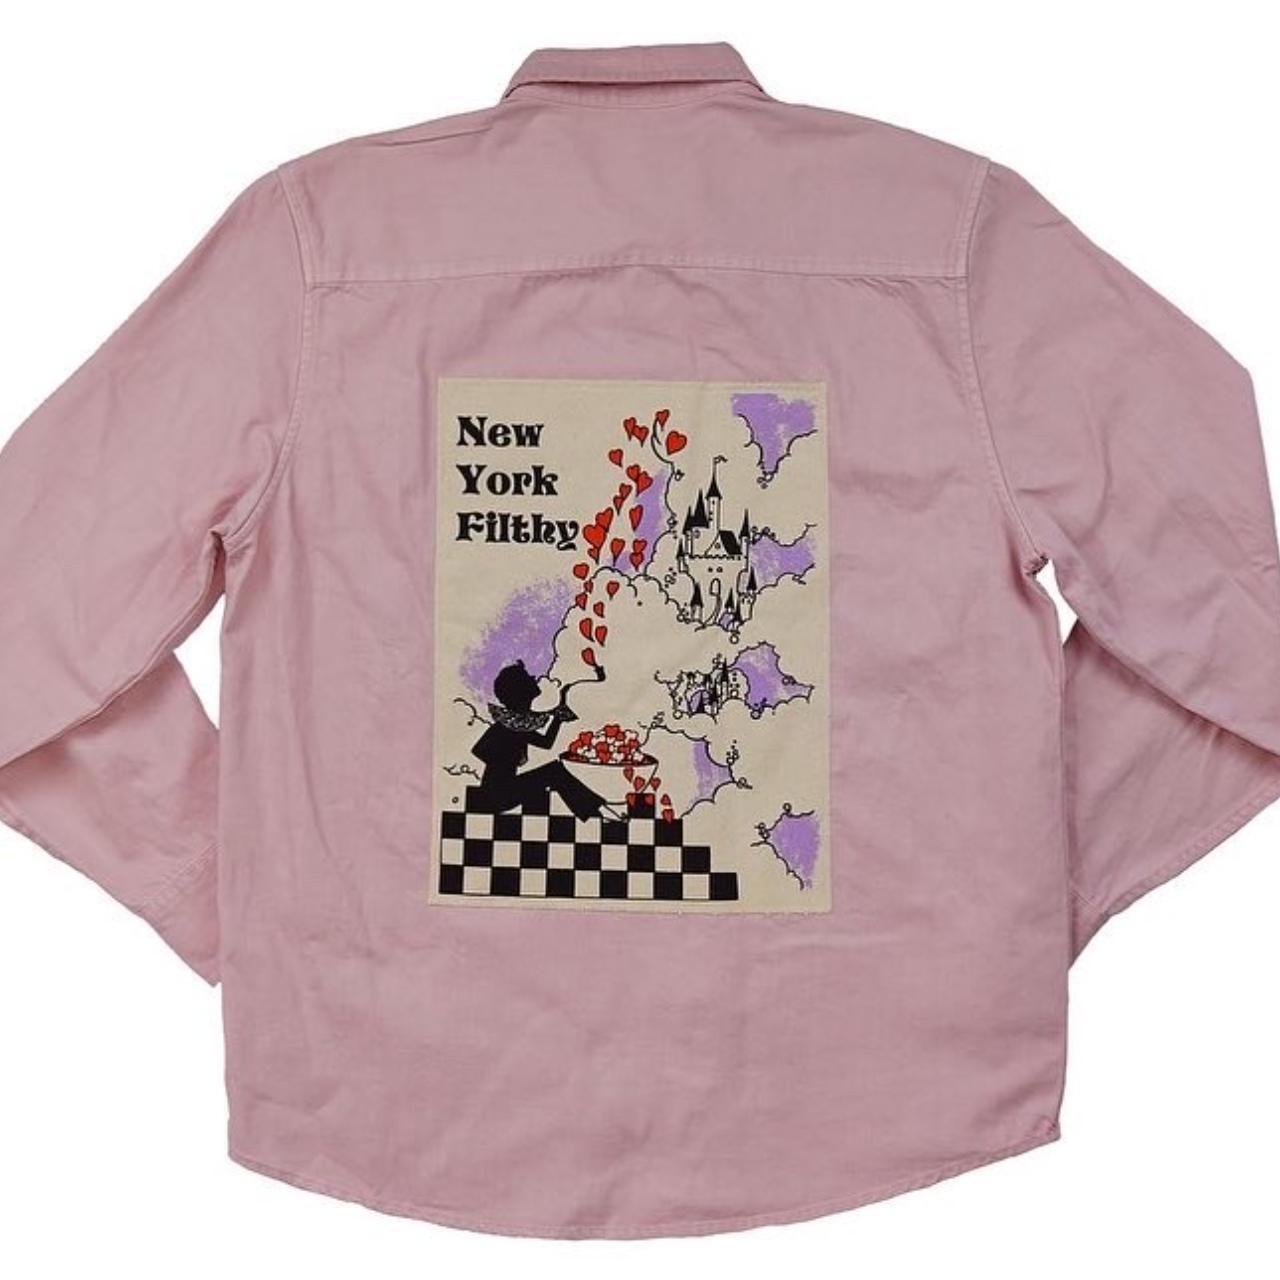 New York Filthy Men's Cream and Pink Shirt